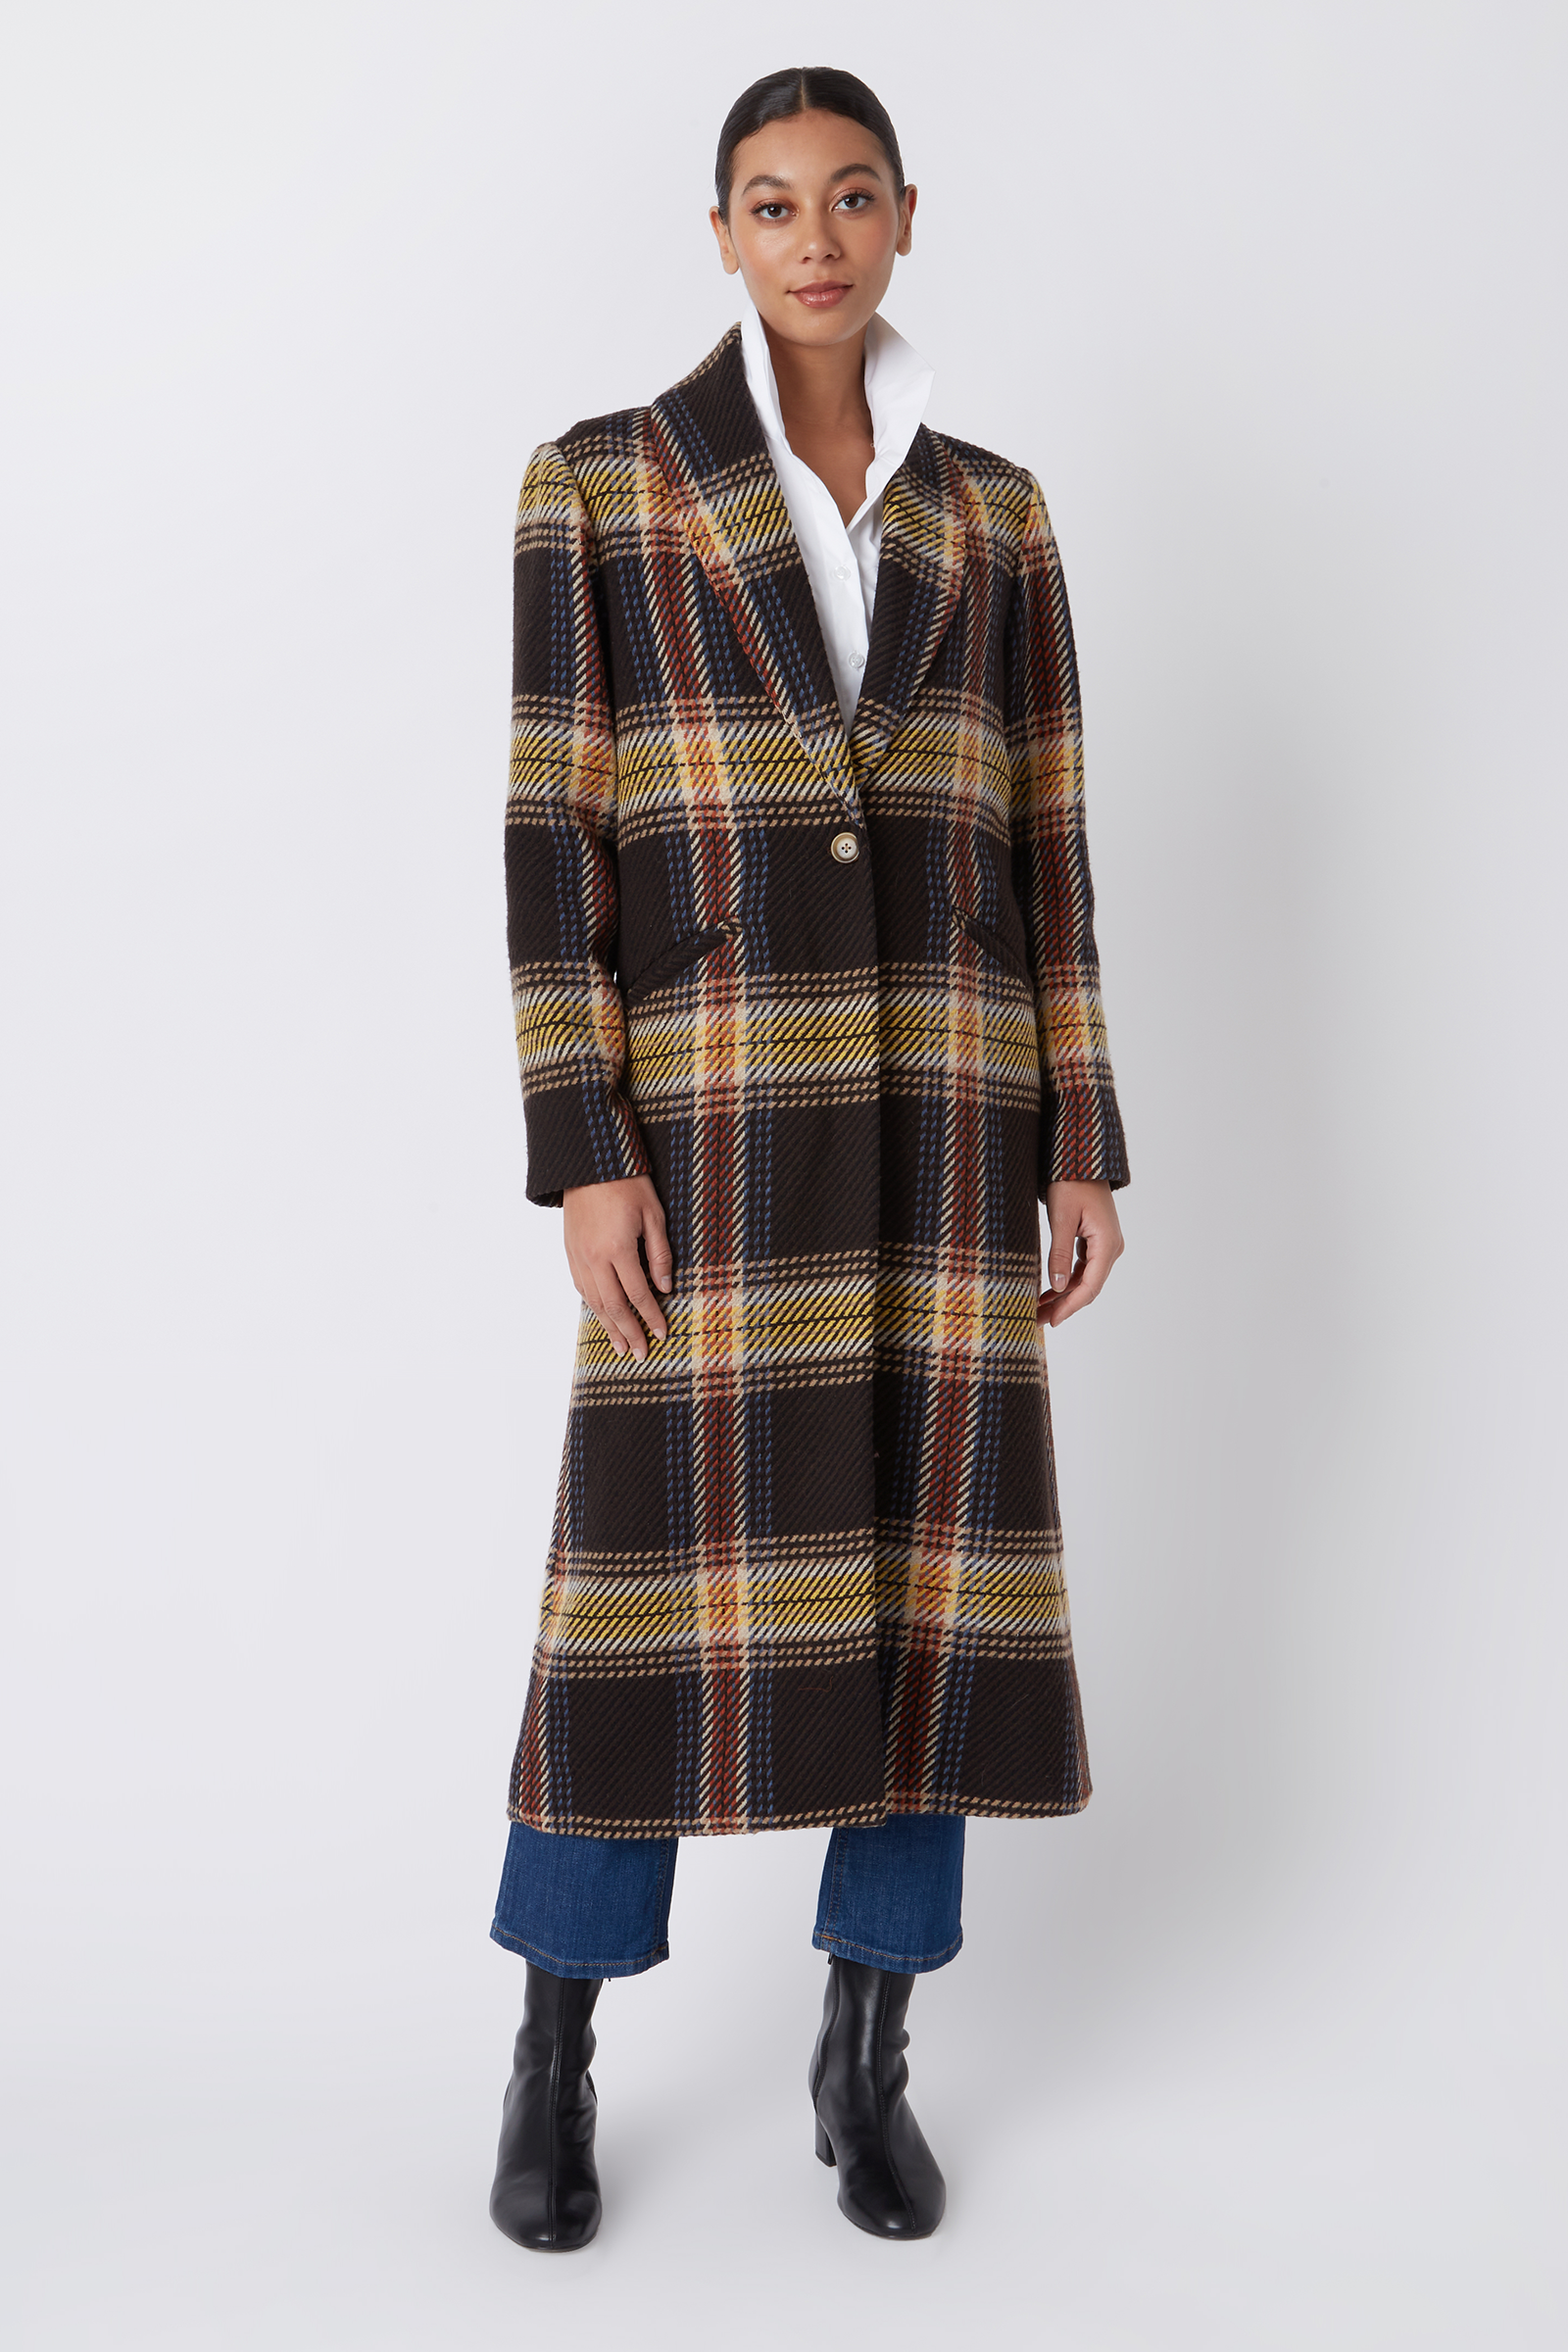 Kal Rieman Bettina Shawl Collar Maxi in Bold Plaid on Model with Coat Buttoned Full Front View